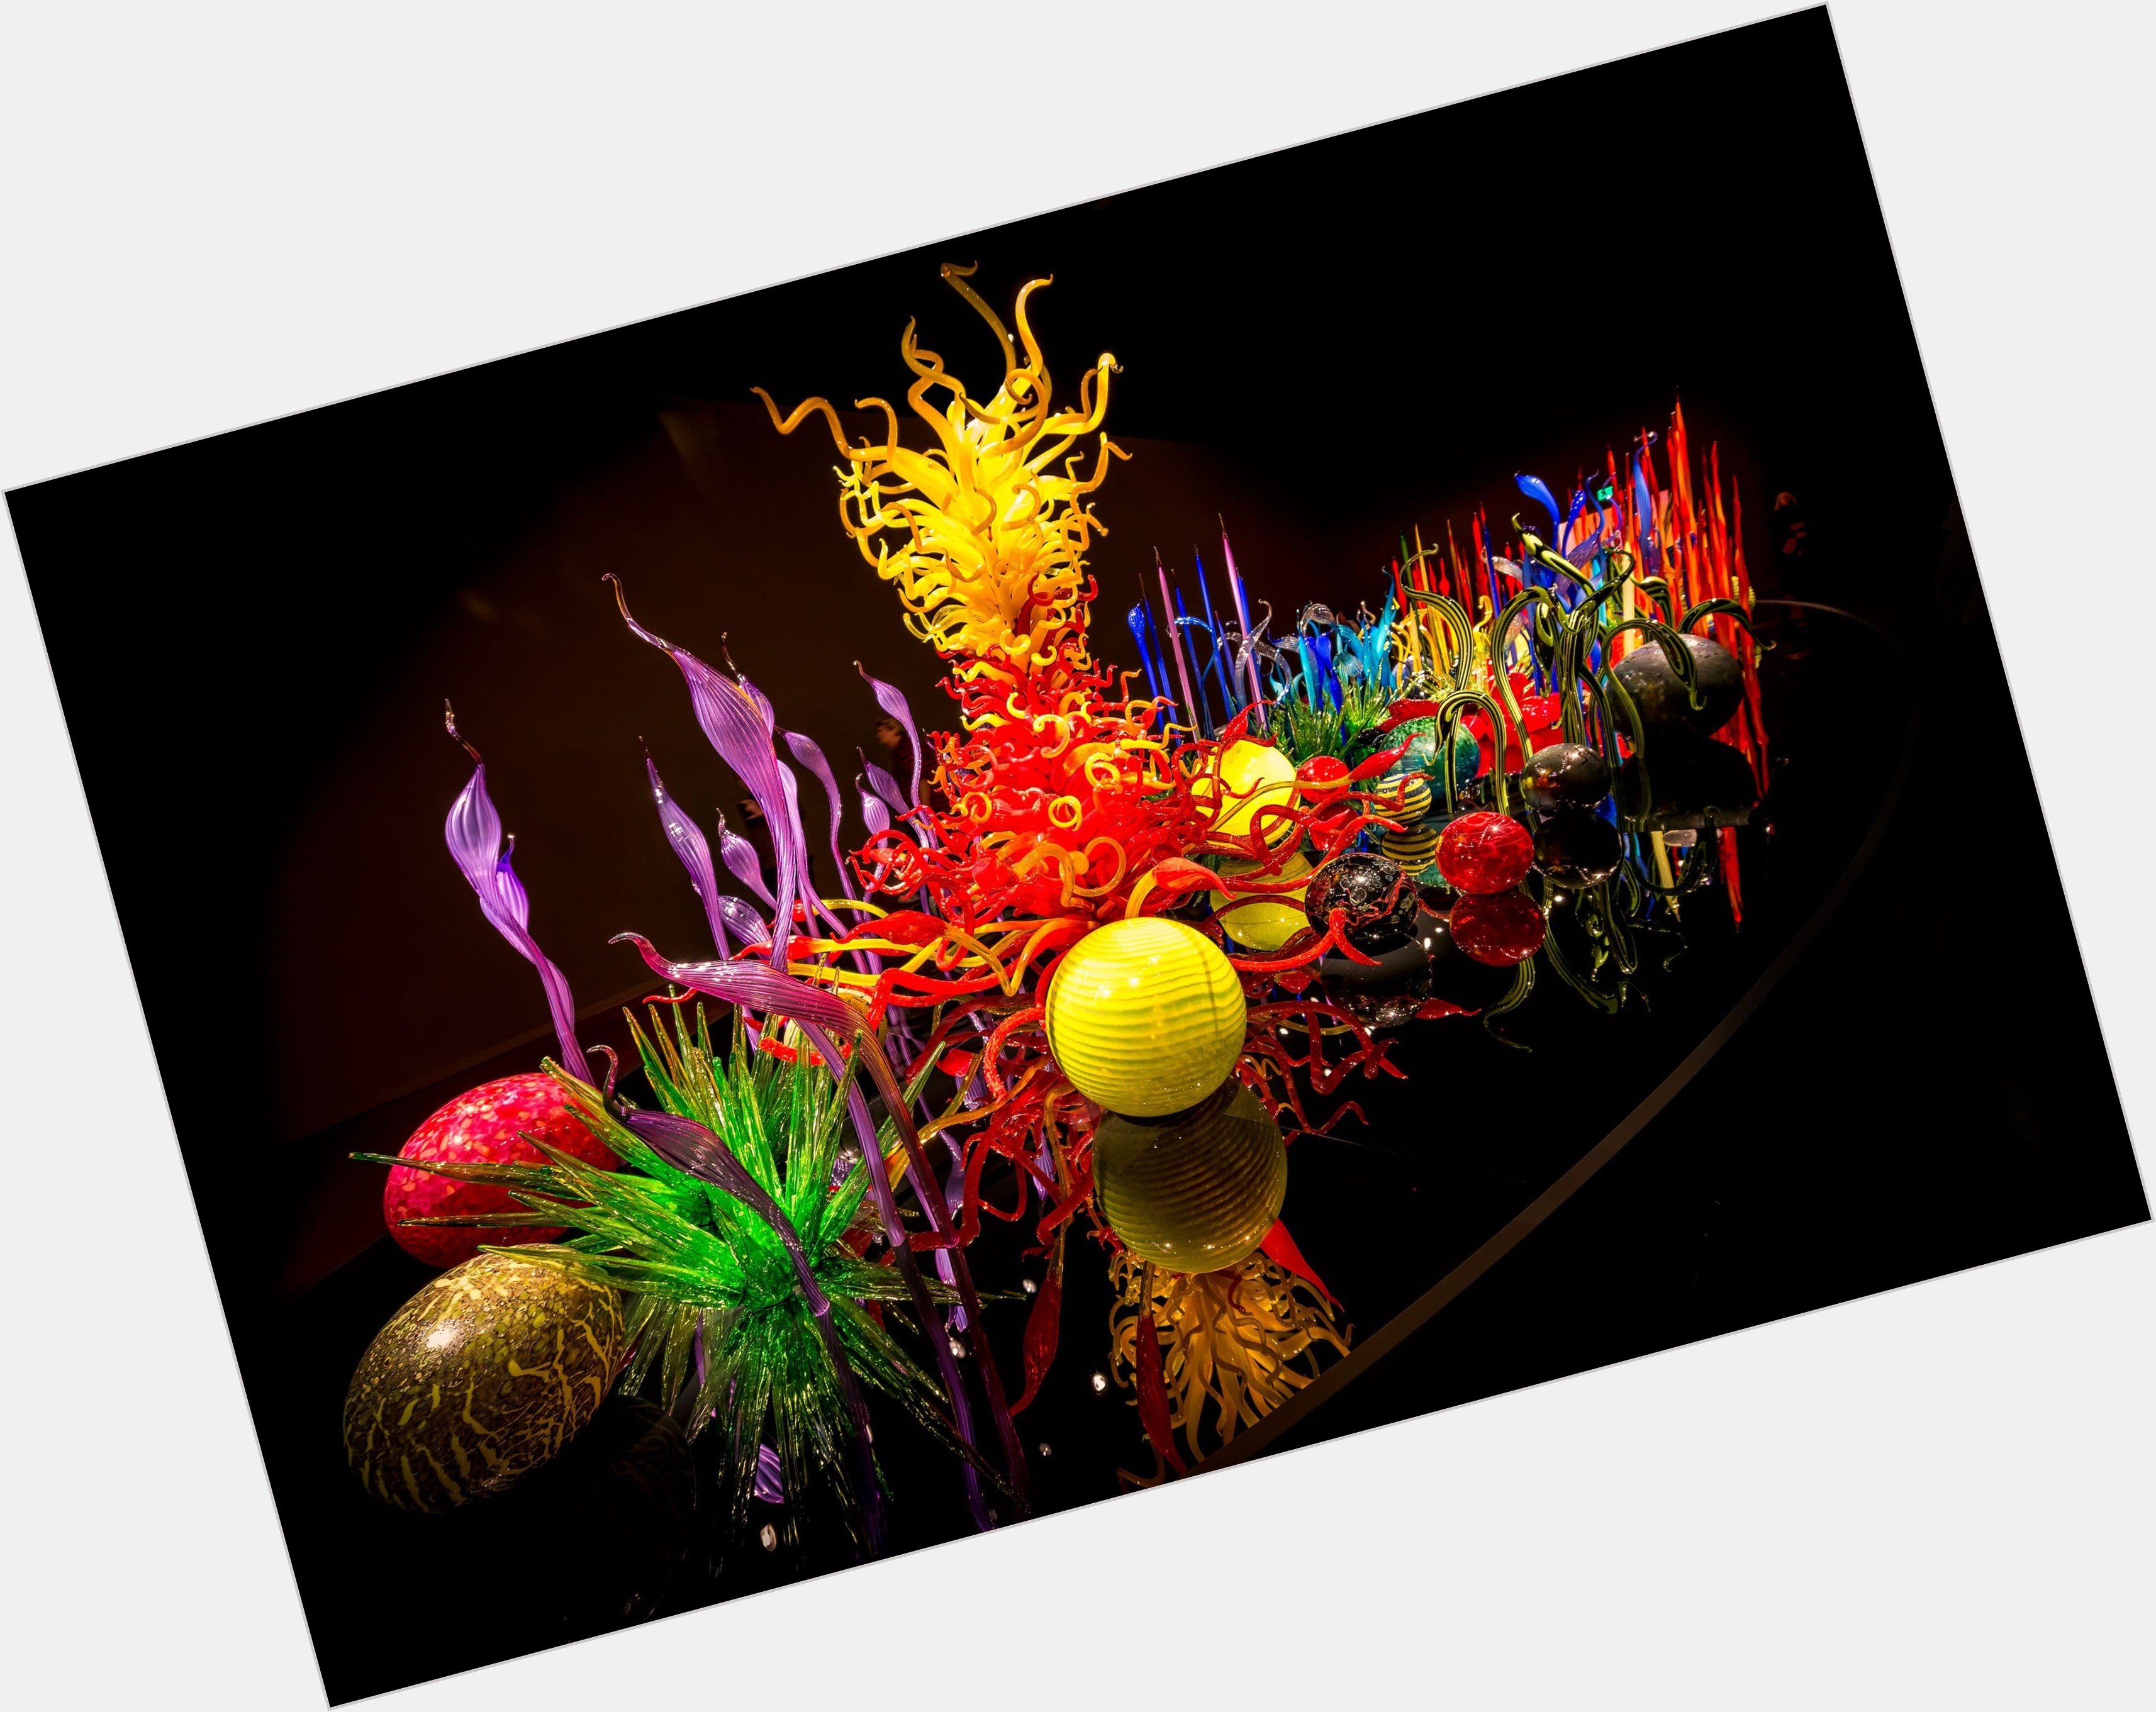 Http://fanpagepress.net/m/D/dale Chihuly Paintings 3